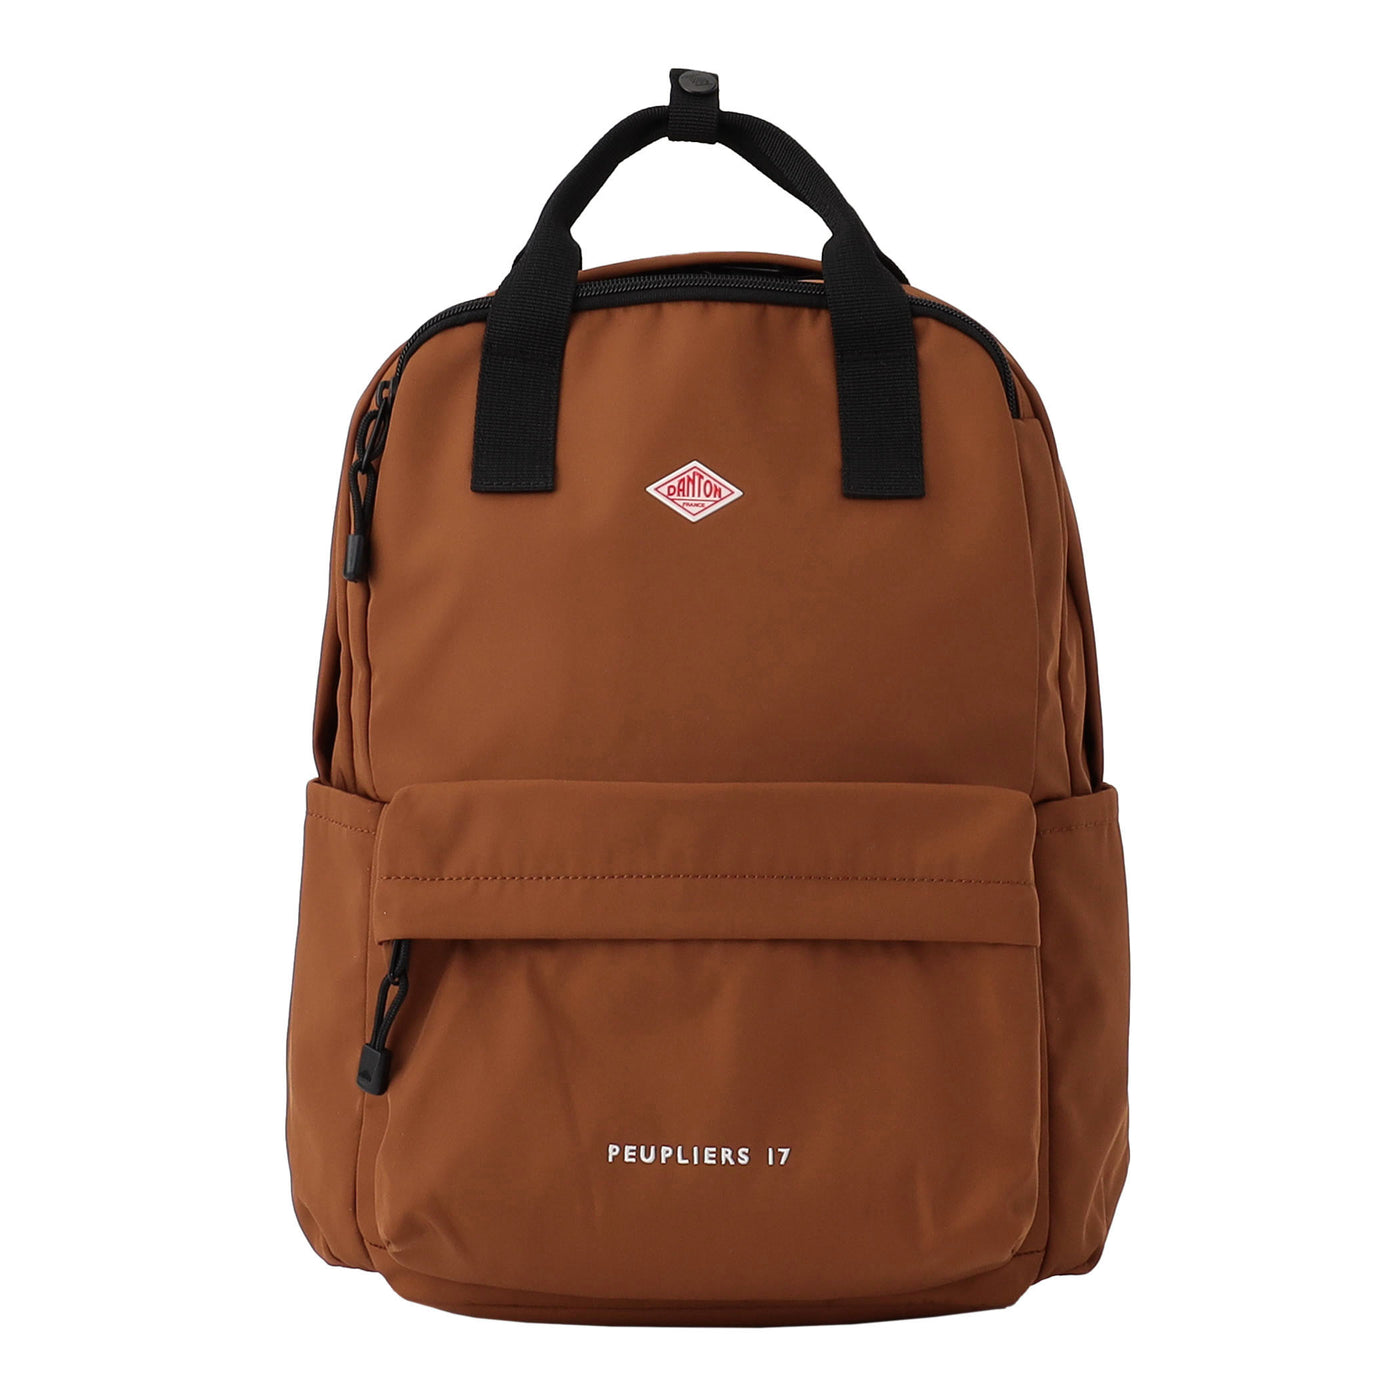 DANTON POLYESTER TWILL BACKPACK〈PEUPLIERS 17〉